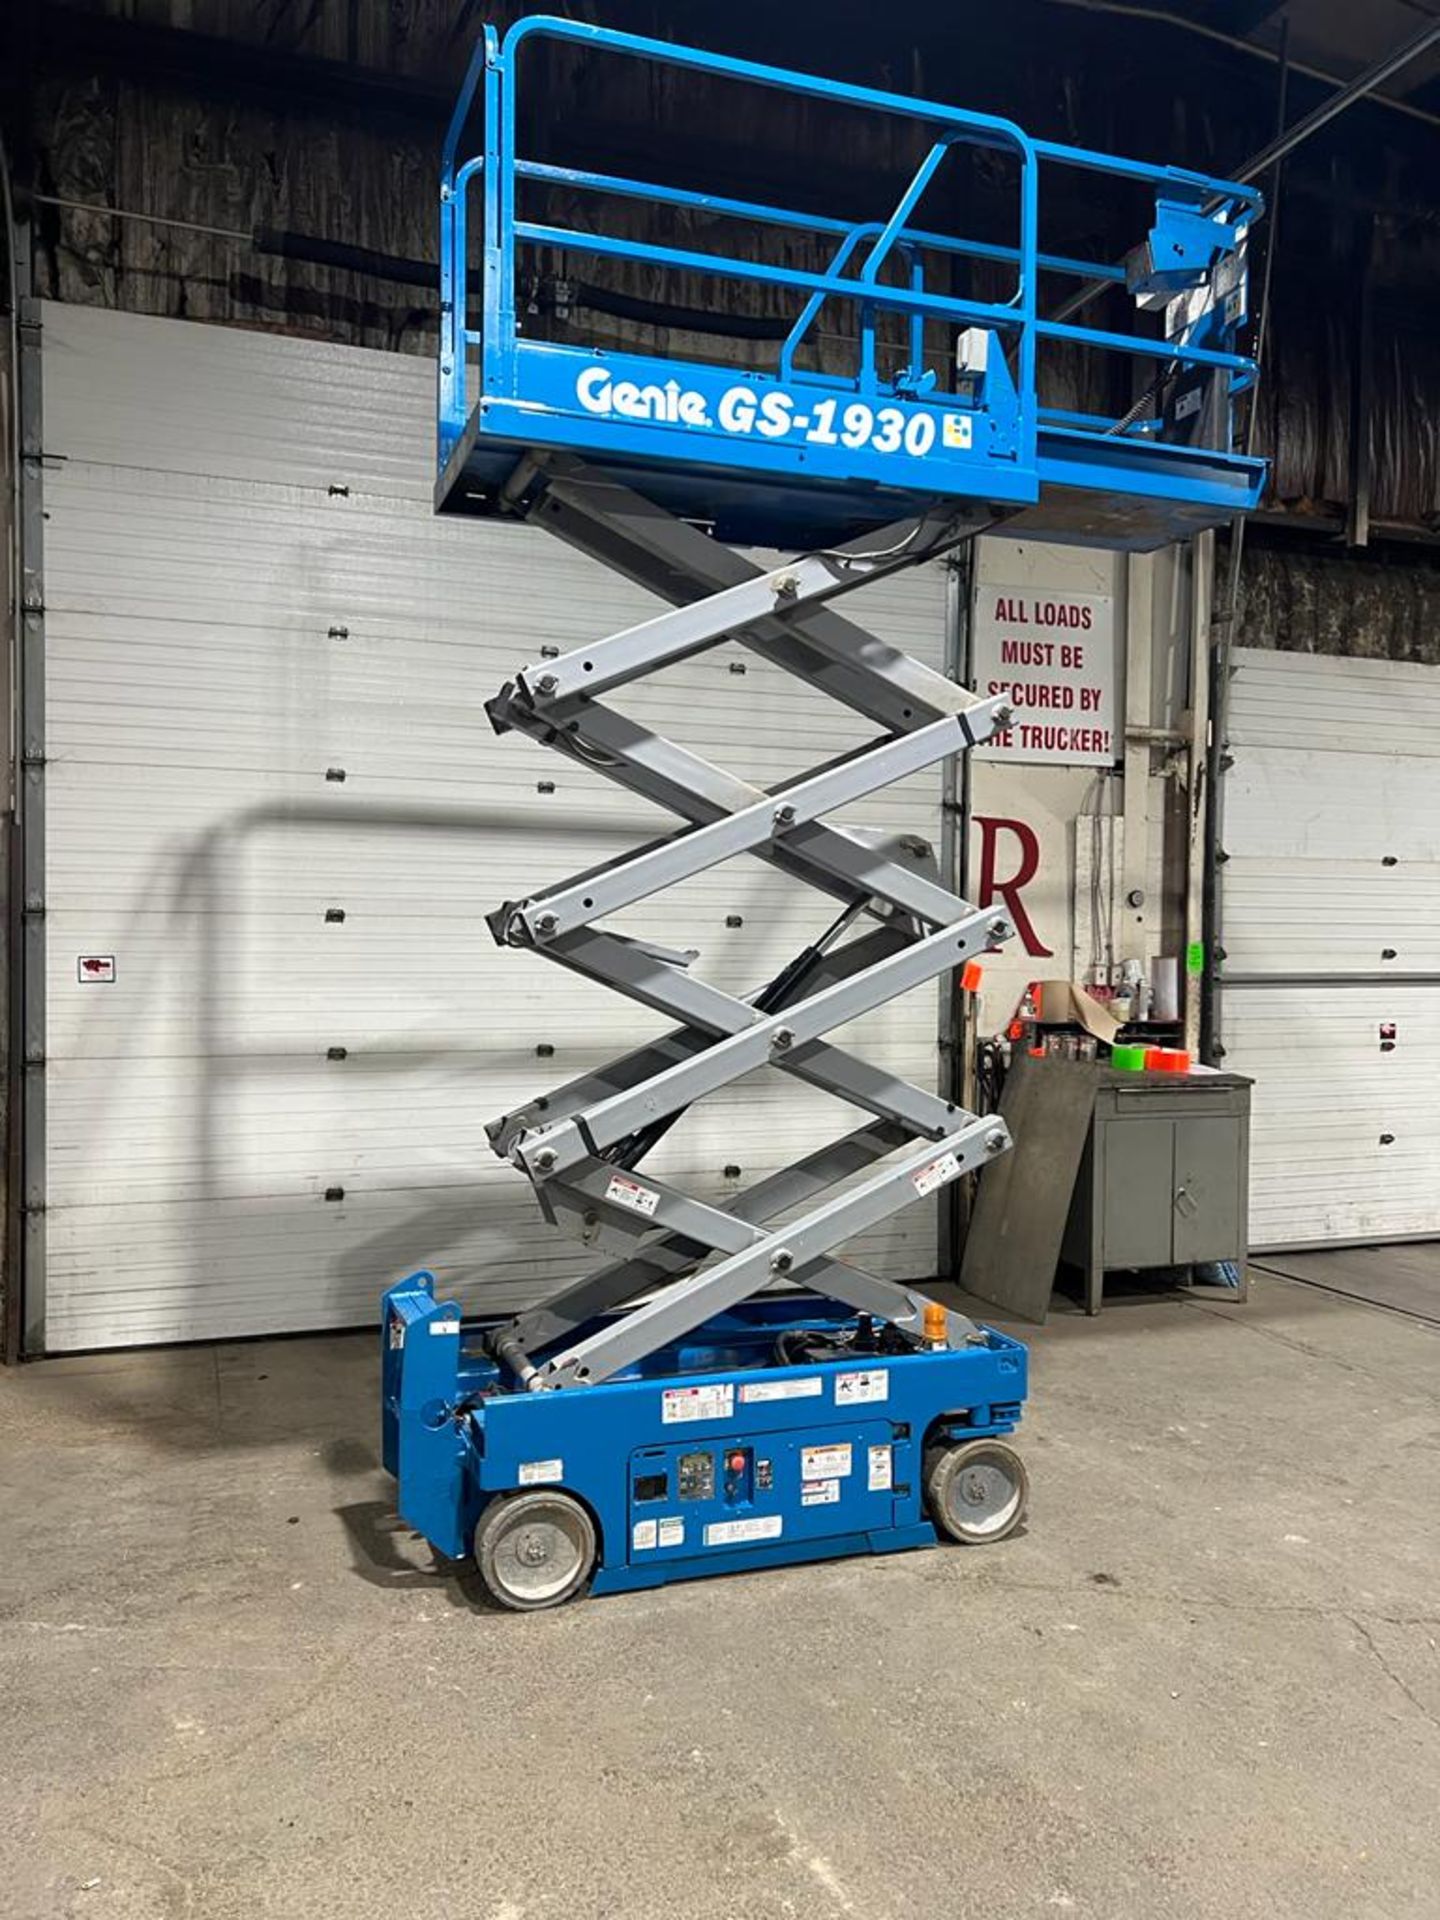 Genie GS-1930 Electric Motorized Scissor Lift - with Extendable Platform Deck with pendant - Image 2 of 3